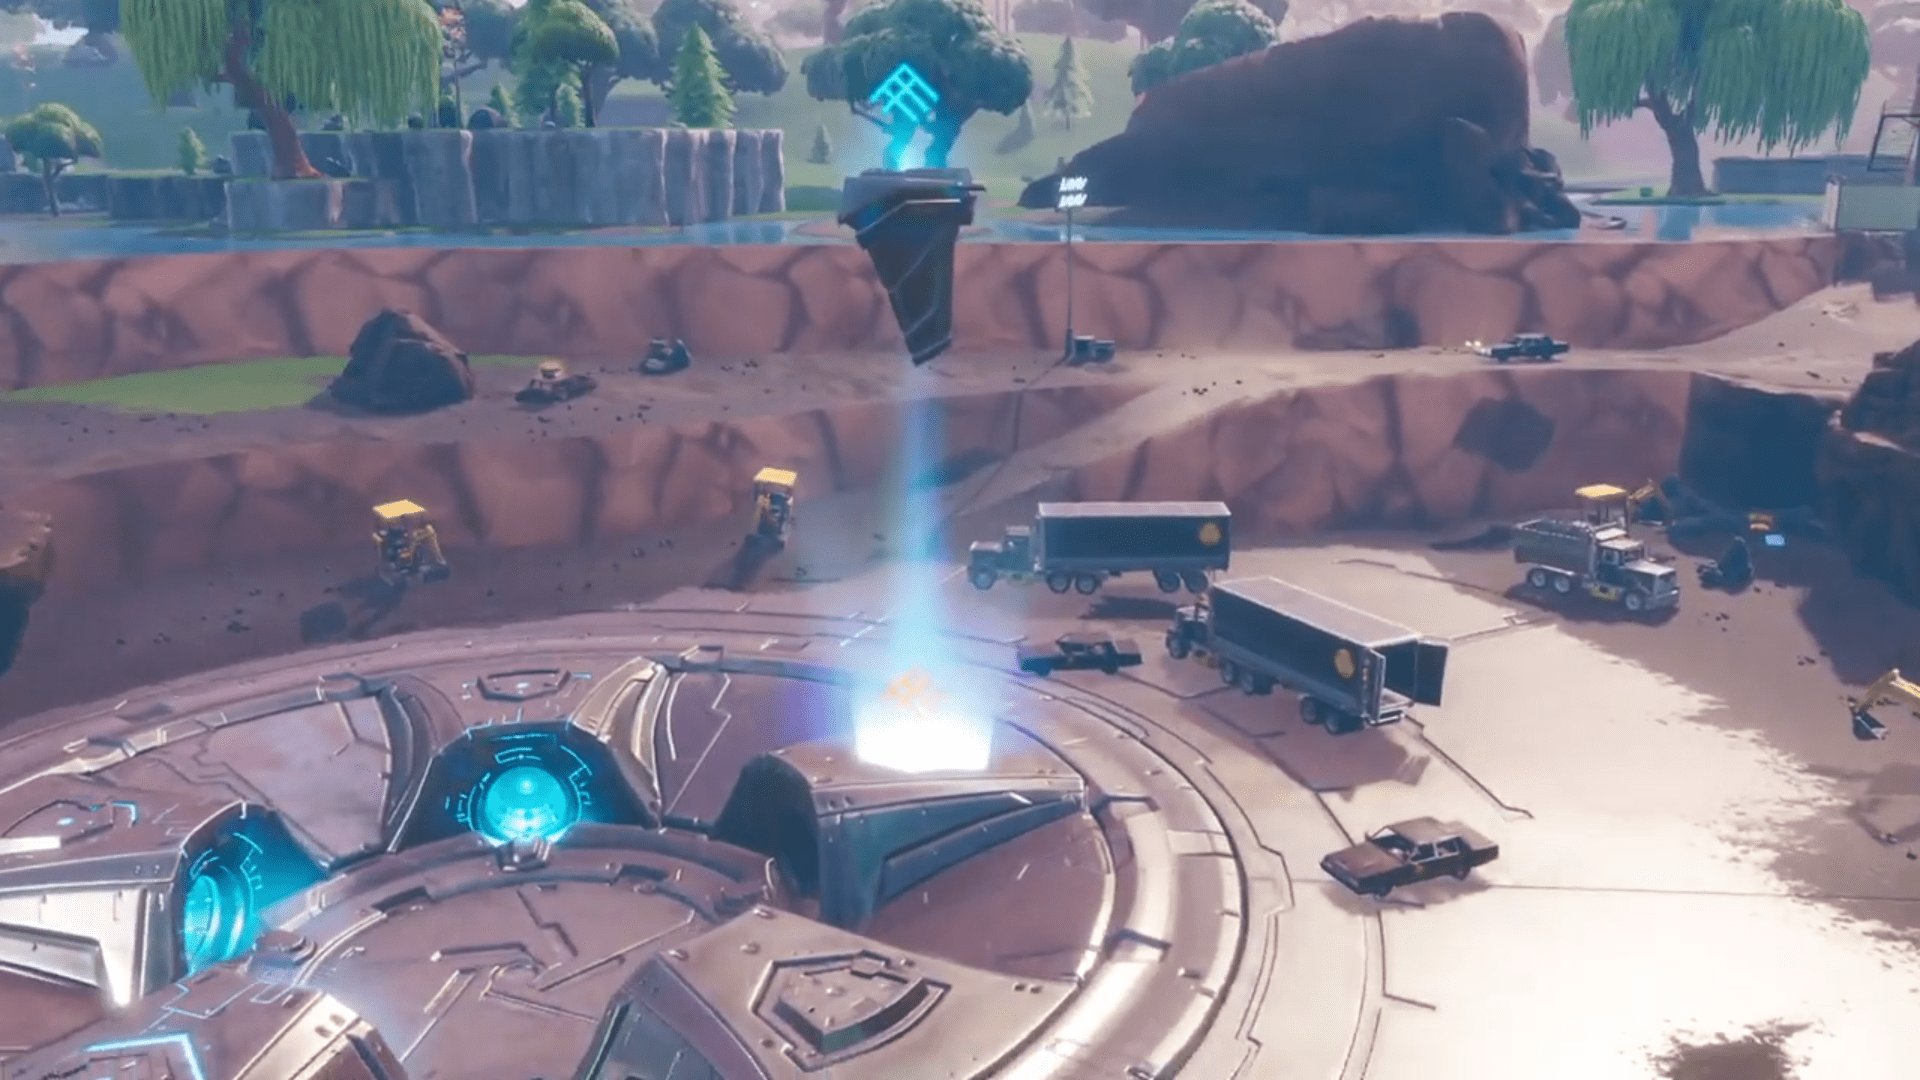 Fortnite Fourth Rune Being Activated at Loot Lake